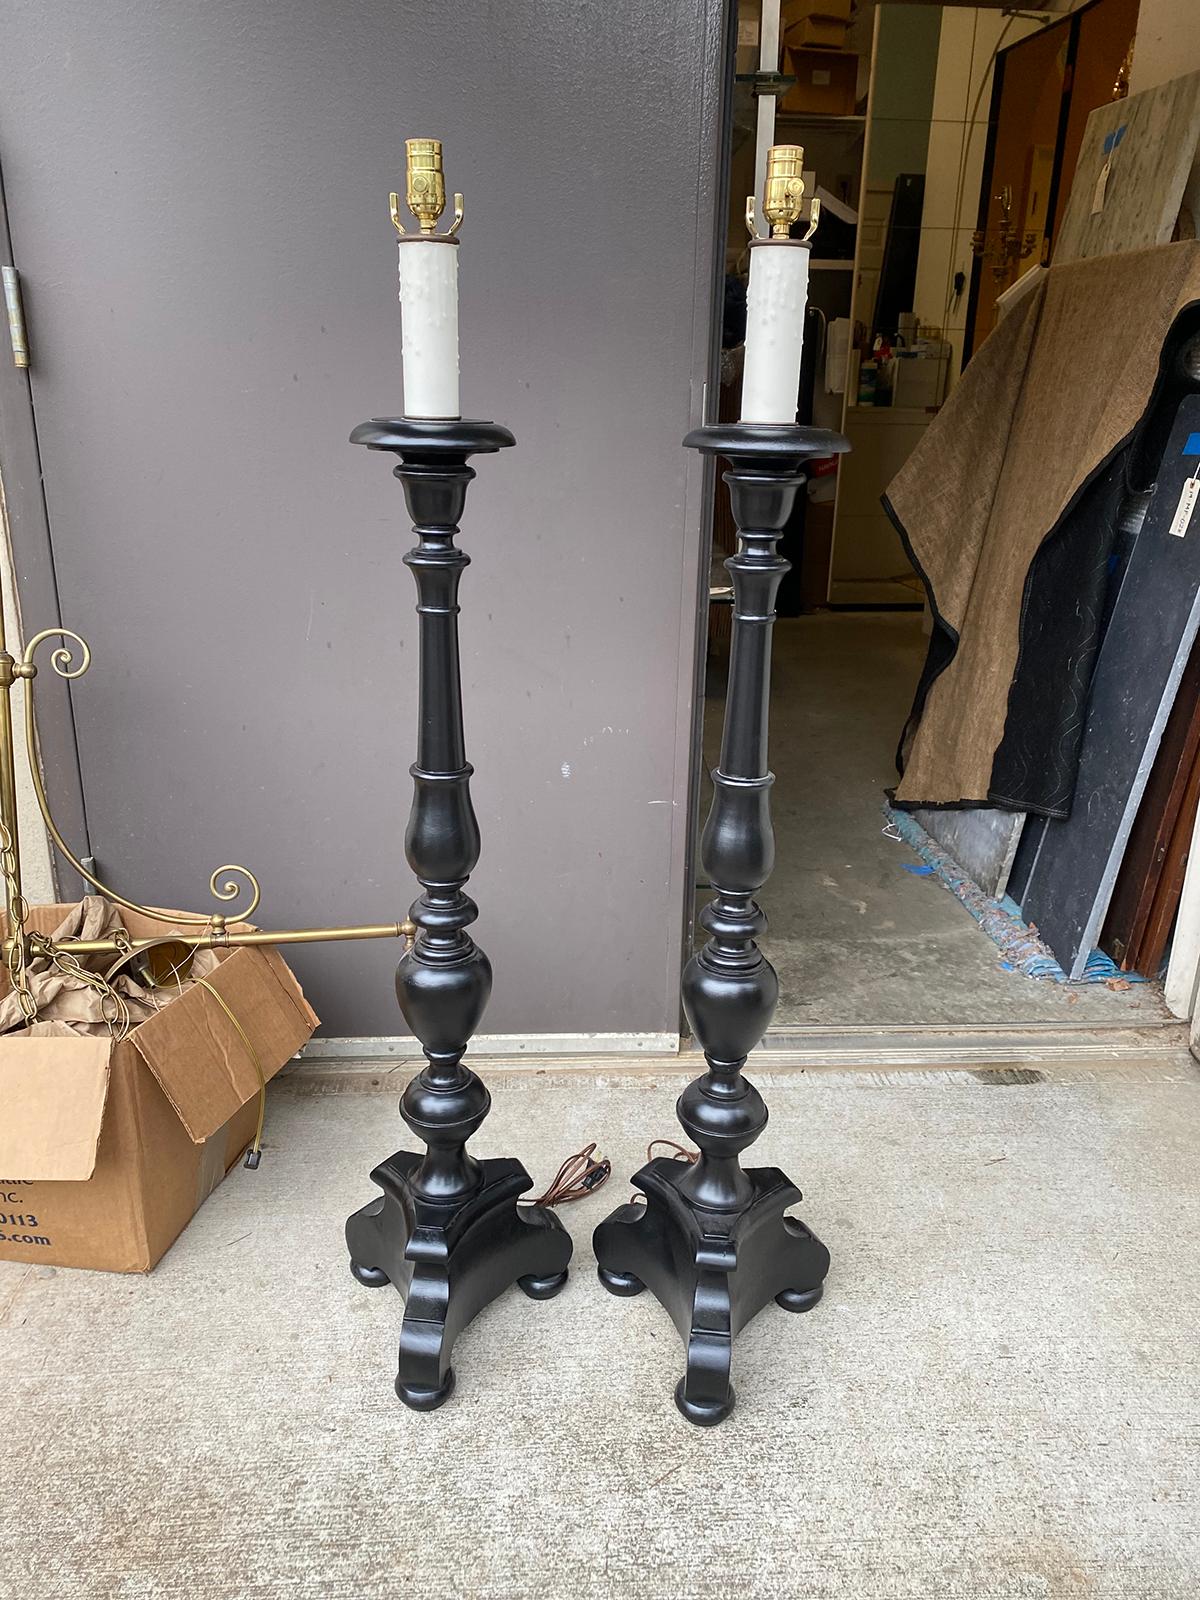 Pair of 20th century pine prickets as floor lamps, custom painted black or ebonized
New wiring.